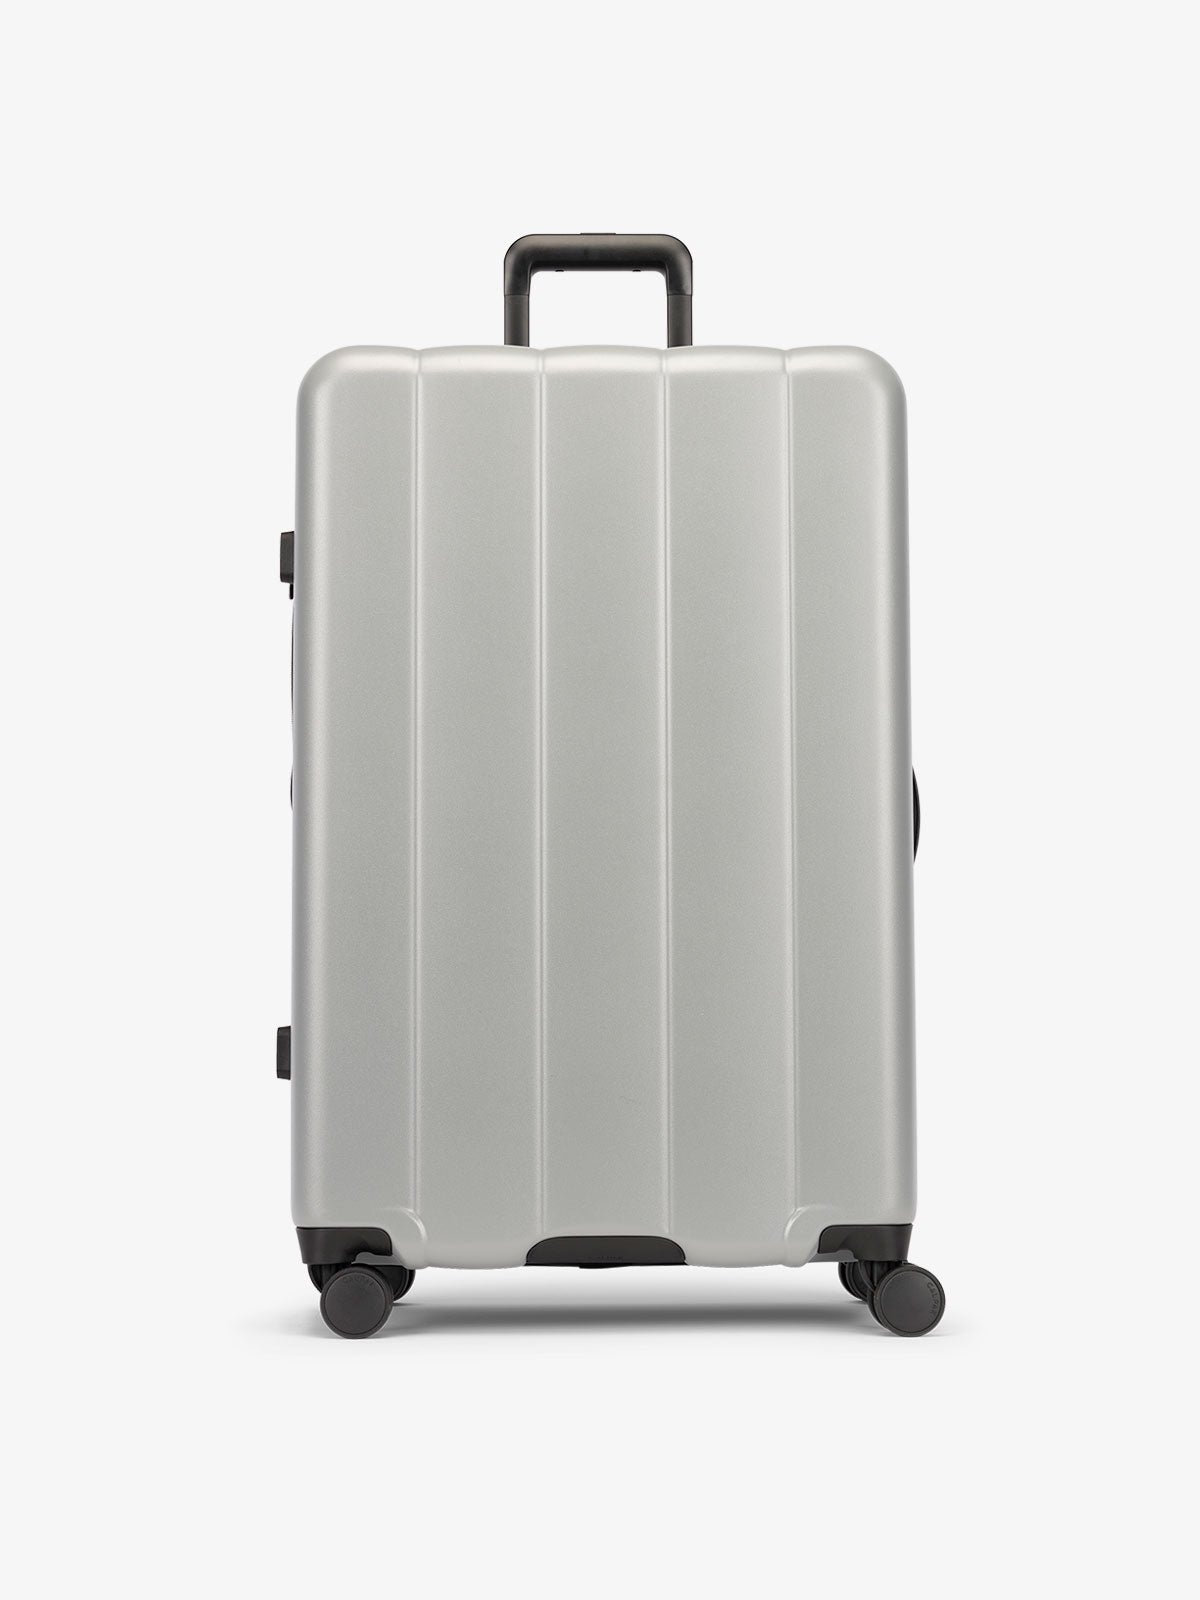 Gray smoke large luggage made from an ultra-durable polycarbonate shell and expandable by up to 2"